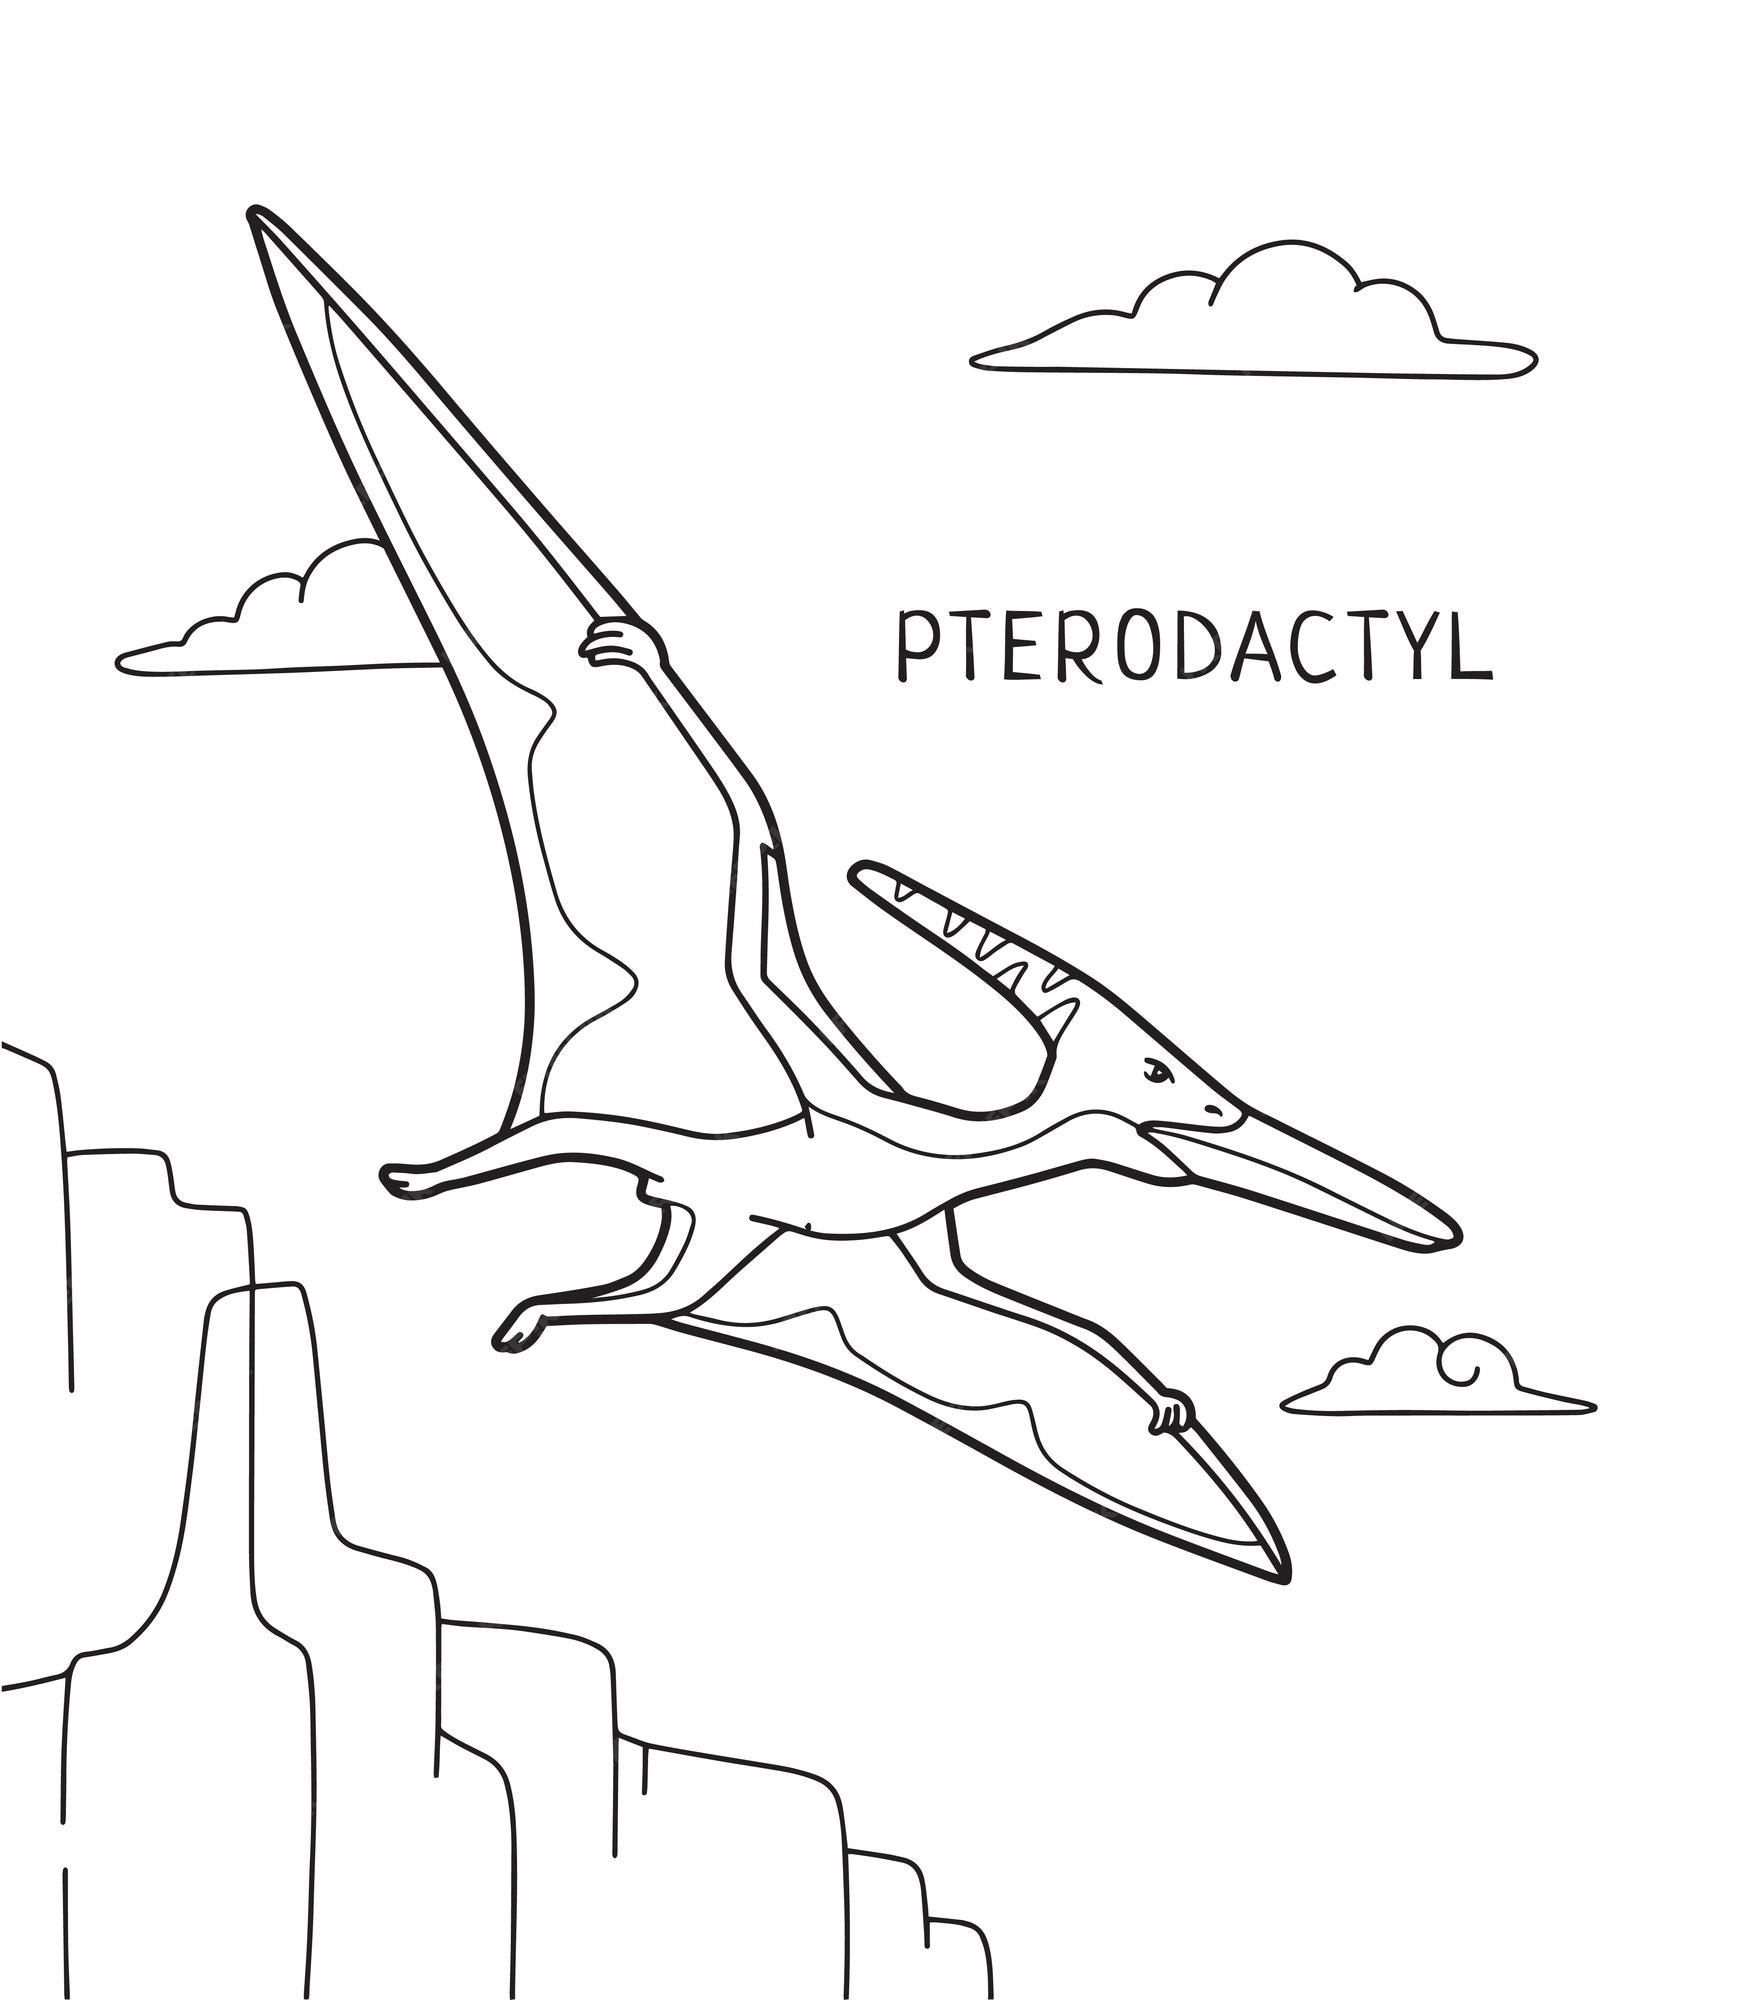 Premium vector pterodactyl dinosaur coloring page for kids